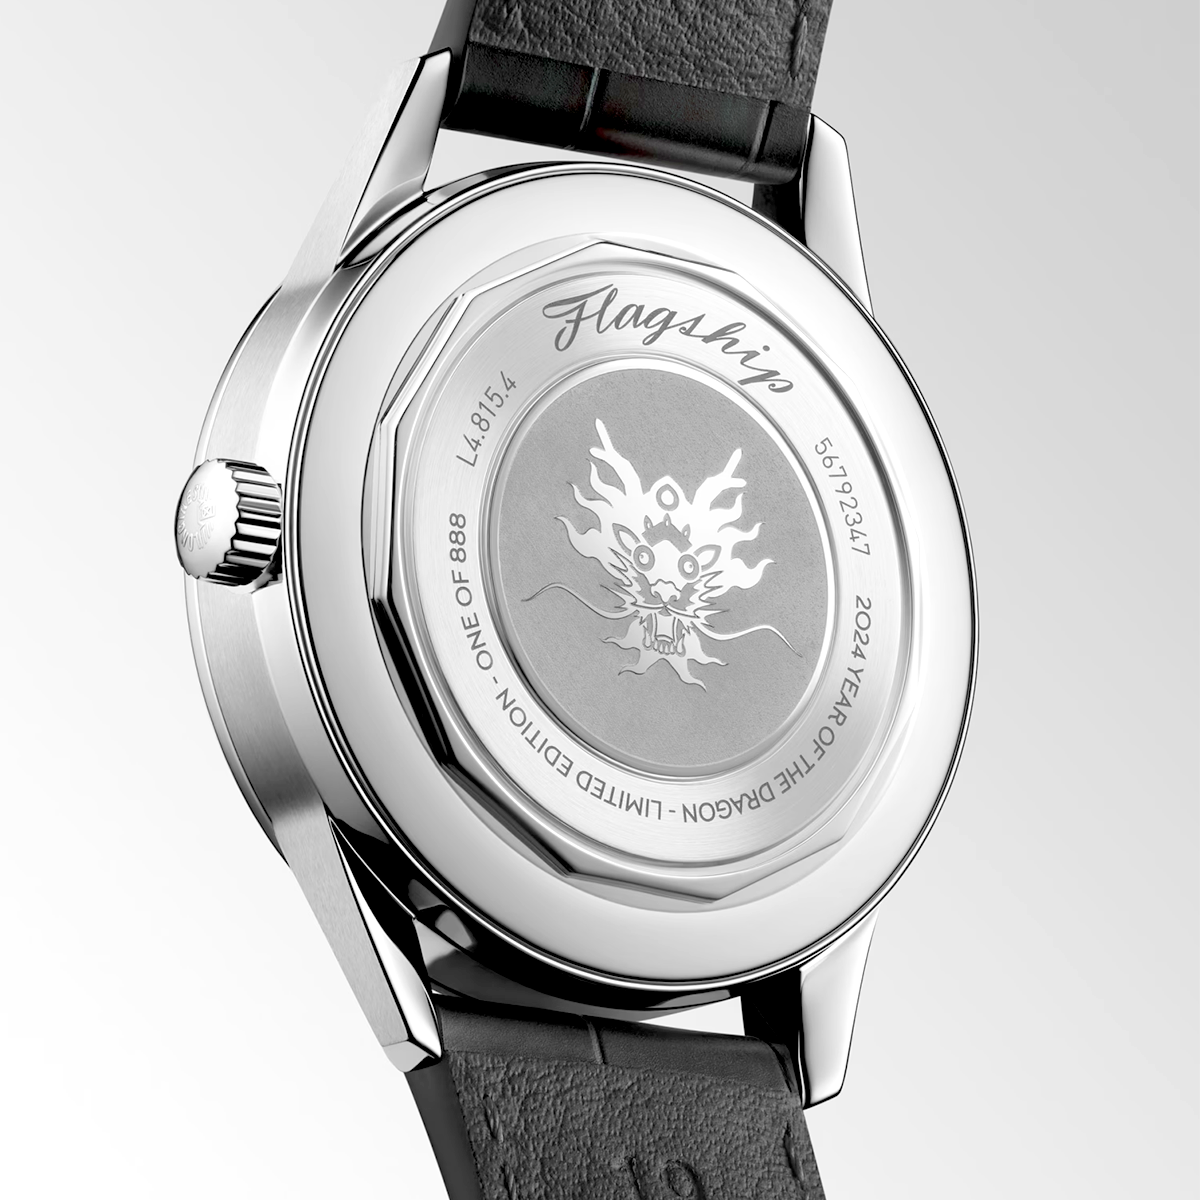 Flagship Heritage 38.5mm 'Year of the Dragon' Limited Edition Watch